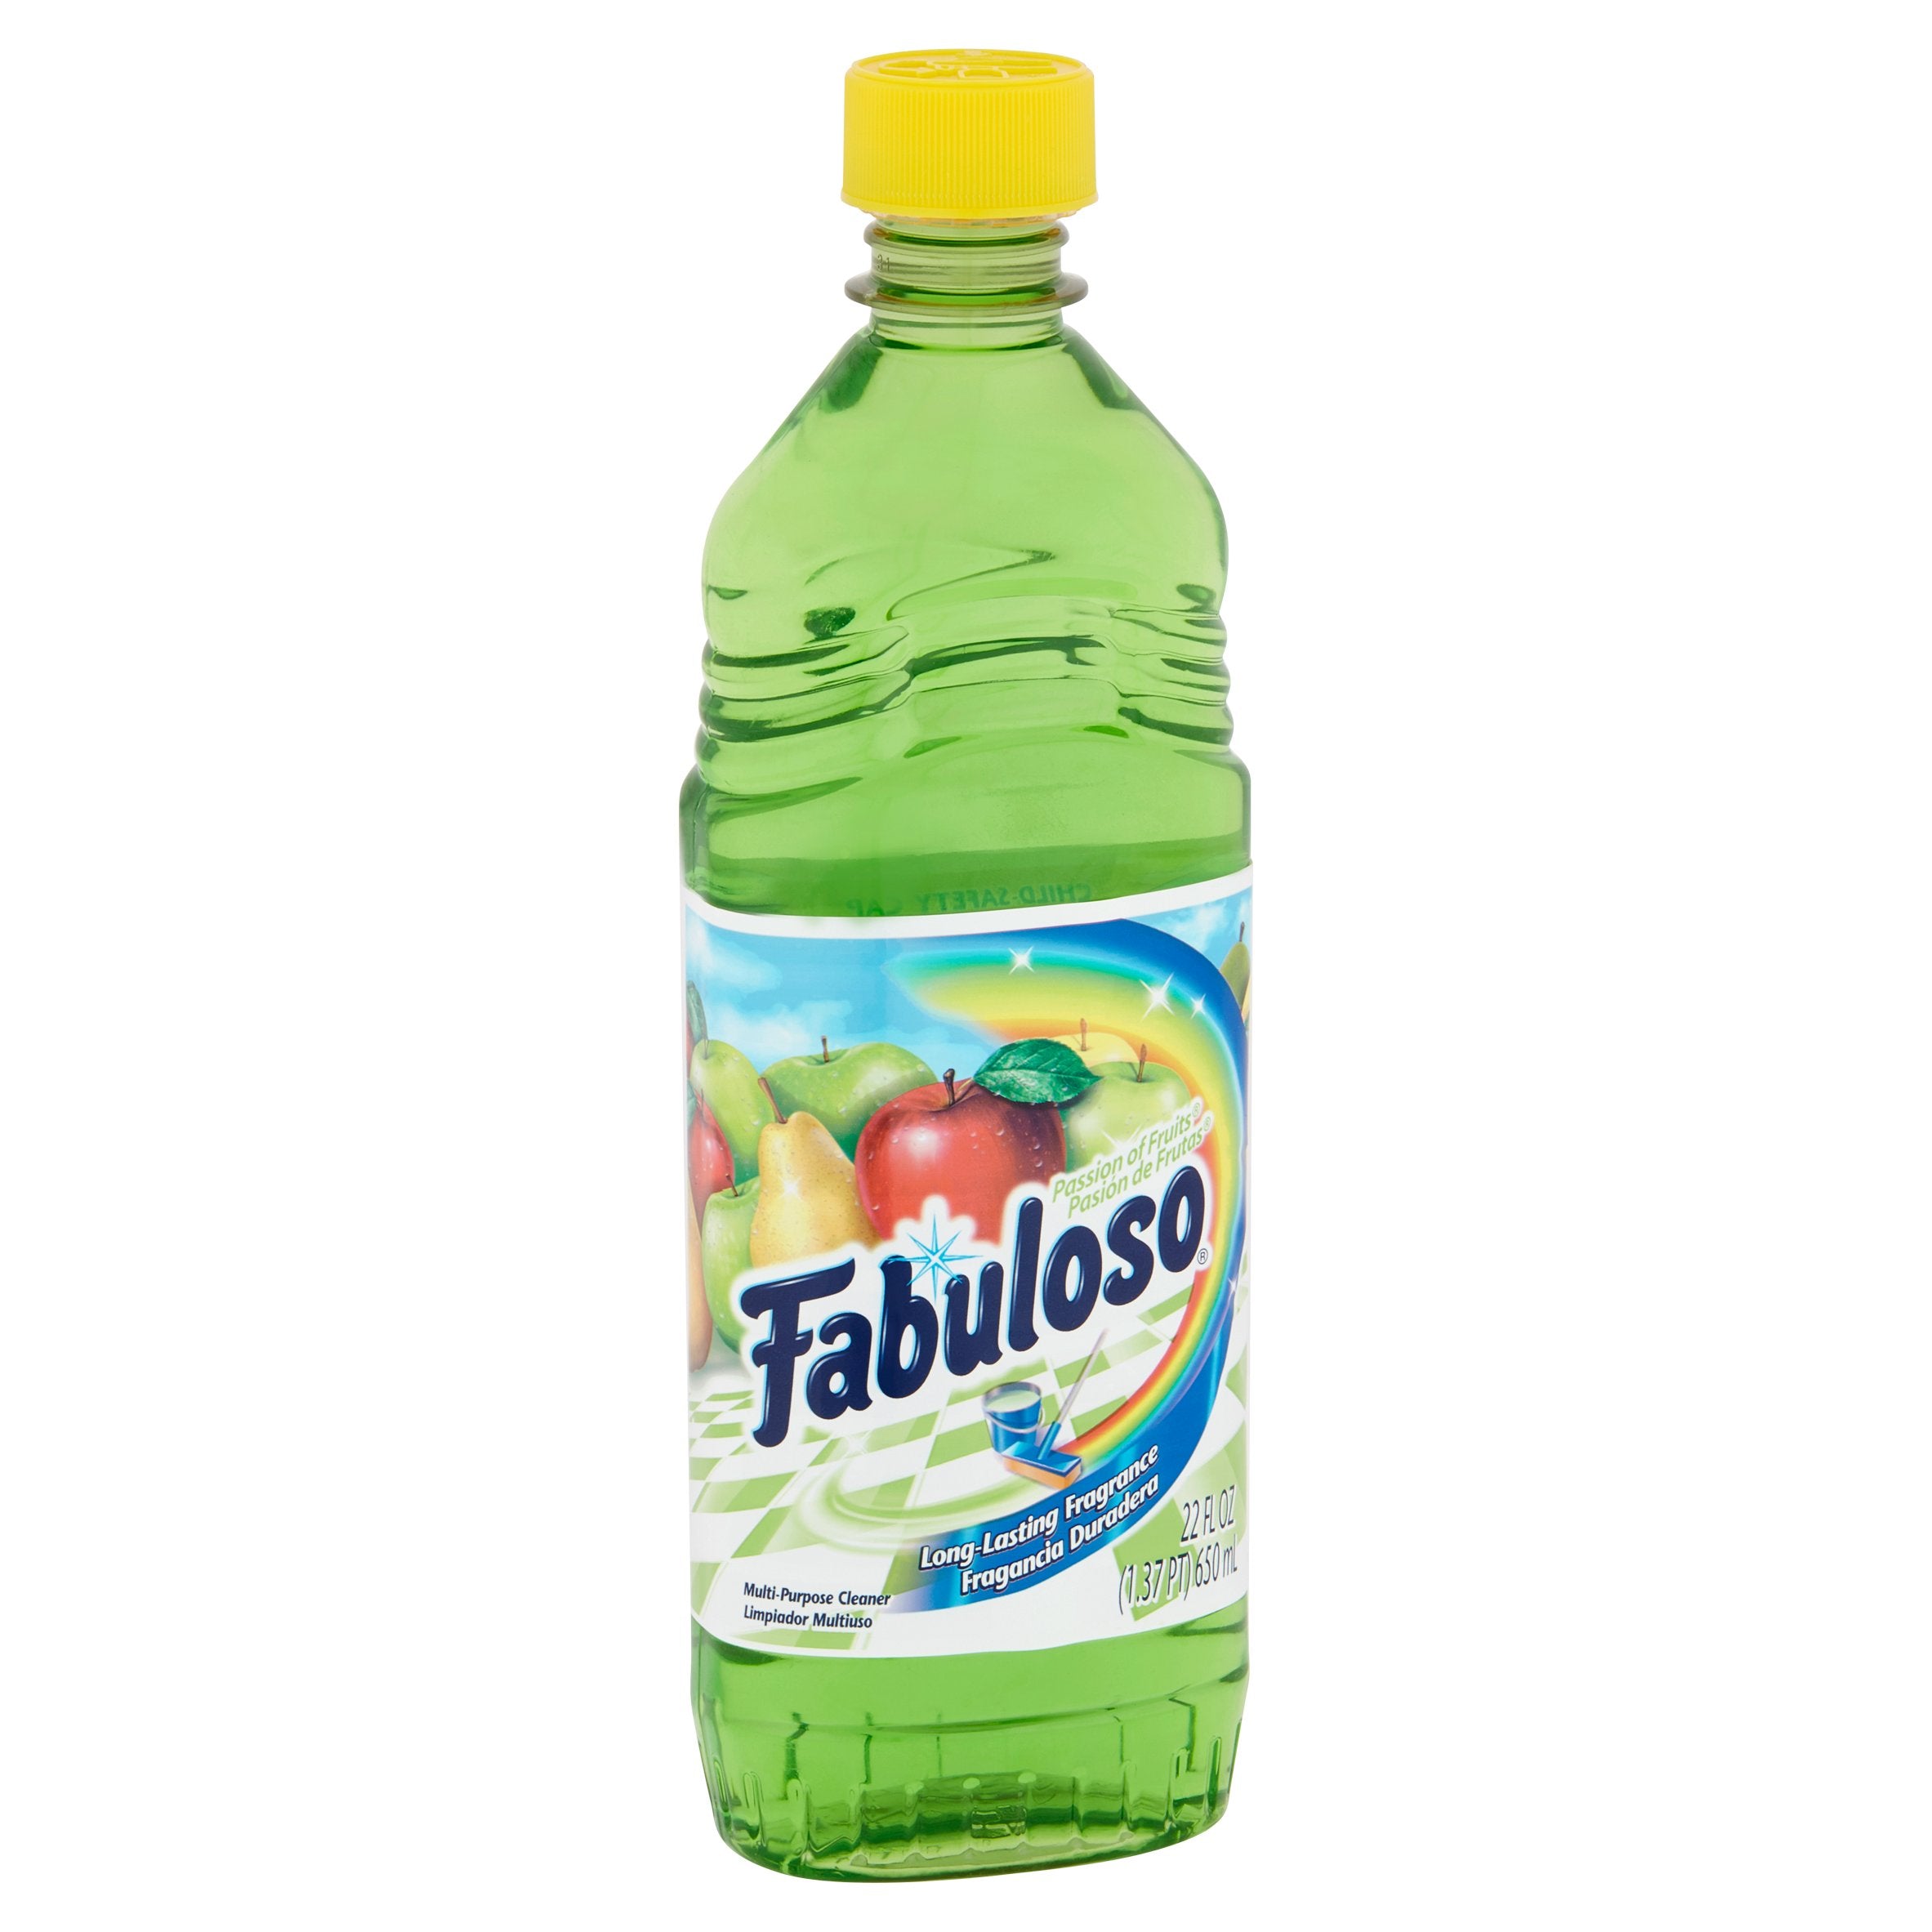 FABULOSO ALL PURPOSE CLEANER PASSION FRUIT 28 OZ